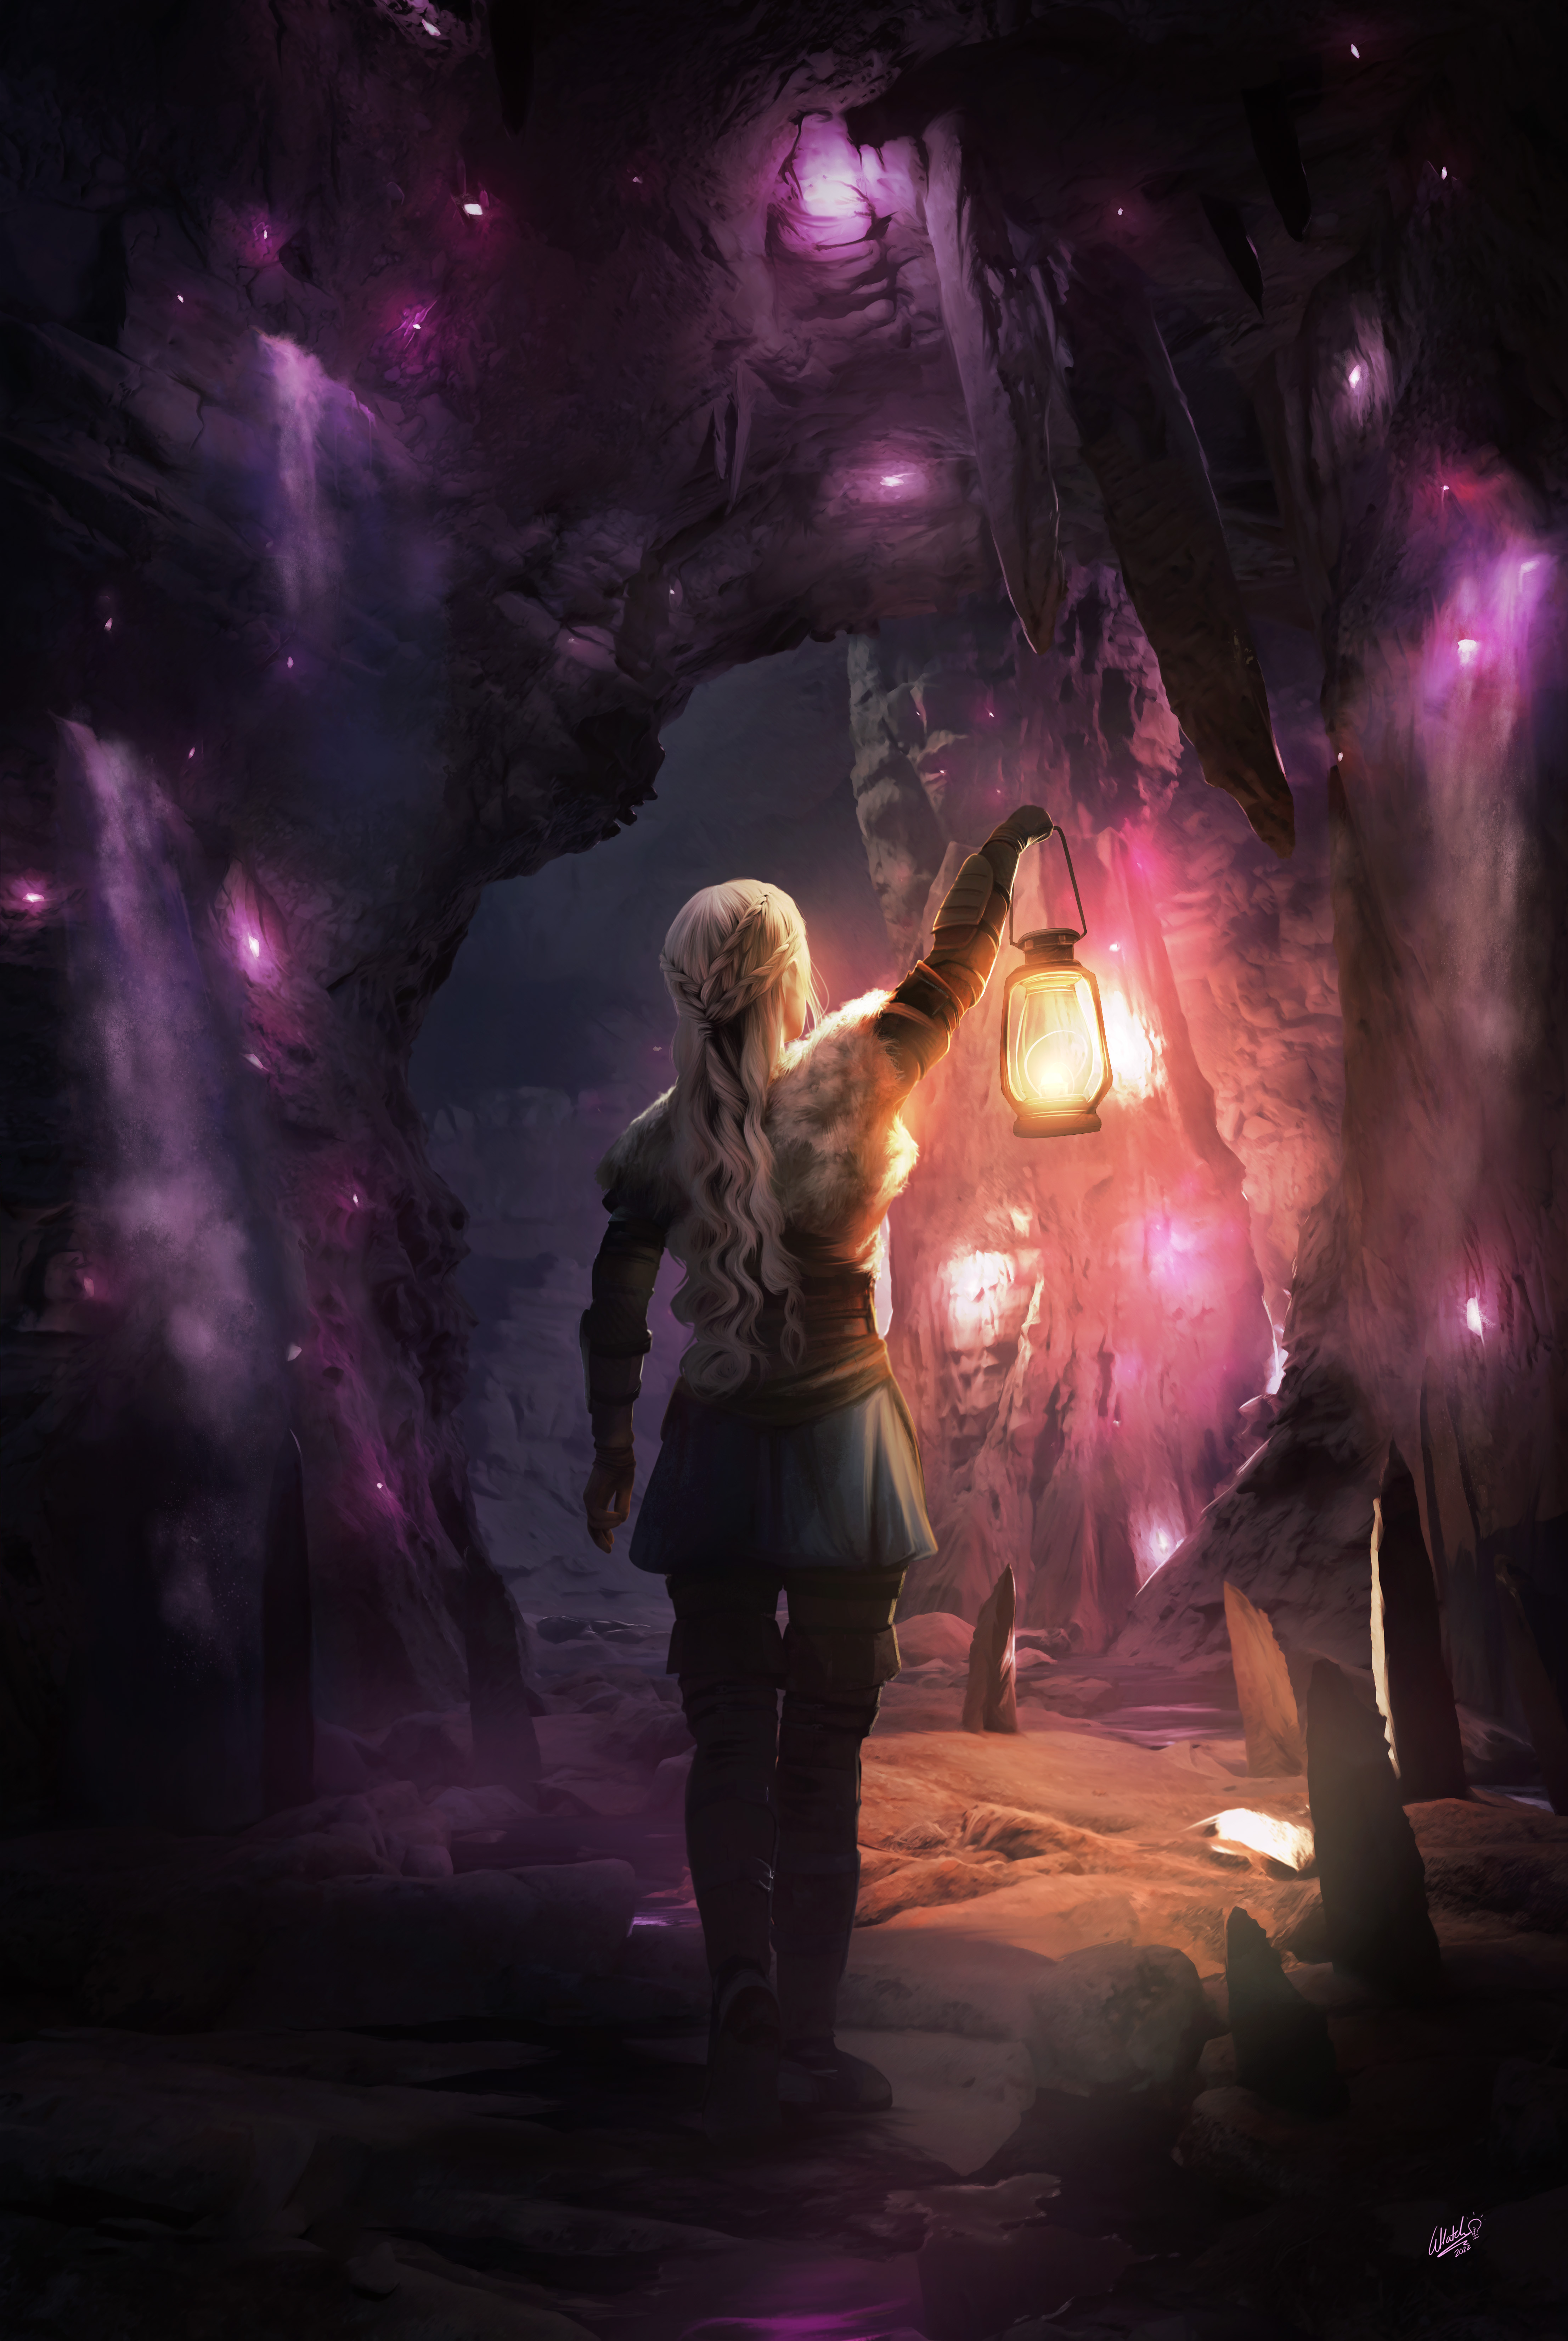 Clíodhna, a blonde girl, is in a dark cave, holding a glowing pink crystal in her palm. There is a hole in the cave wall where she pulled it from. Other crystals glow in the walls behind her.